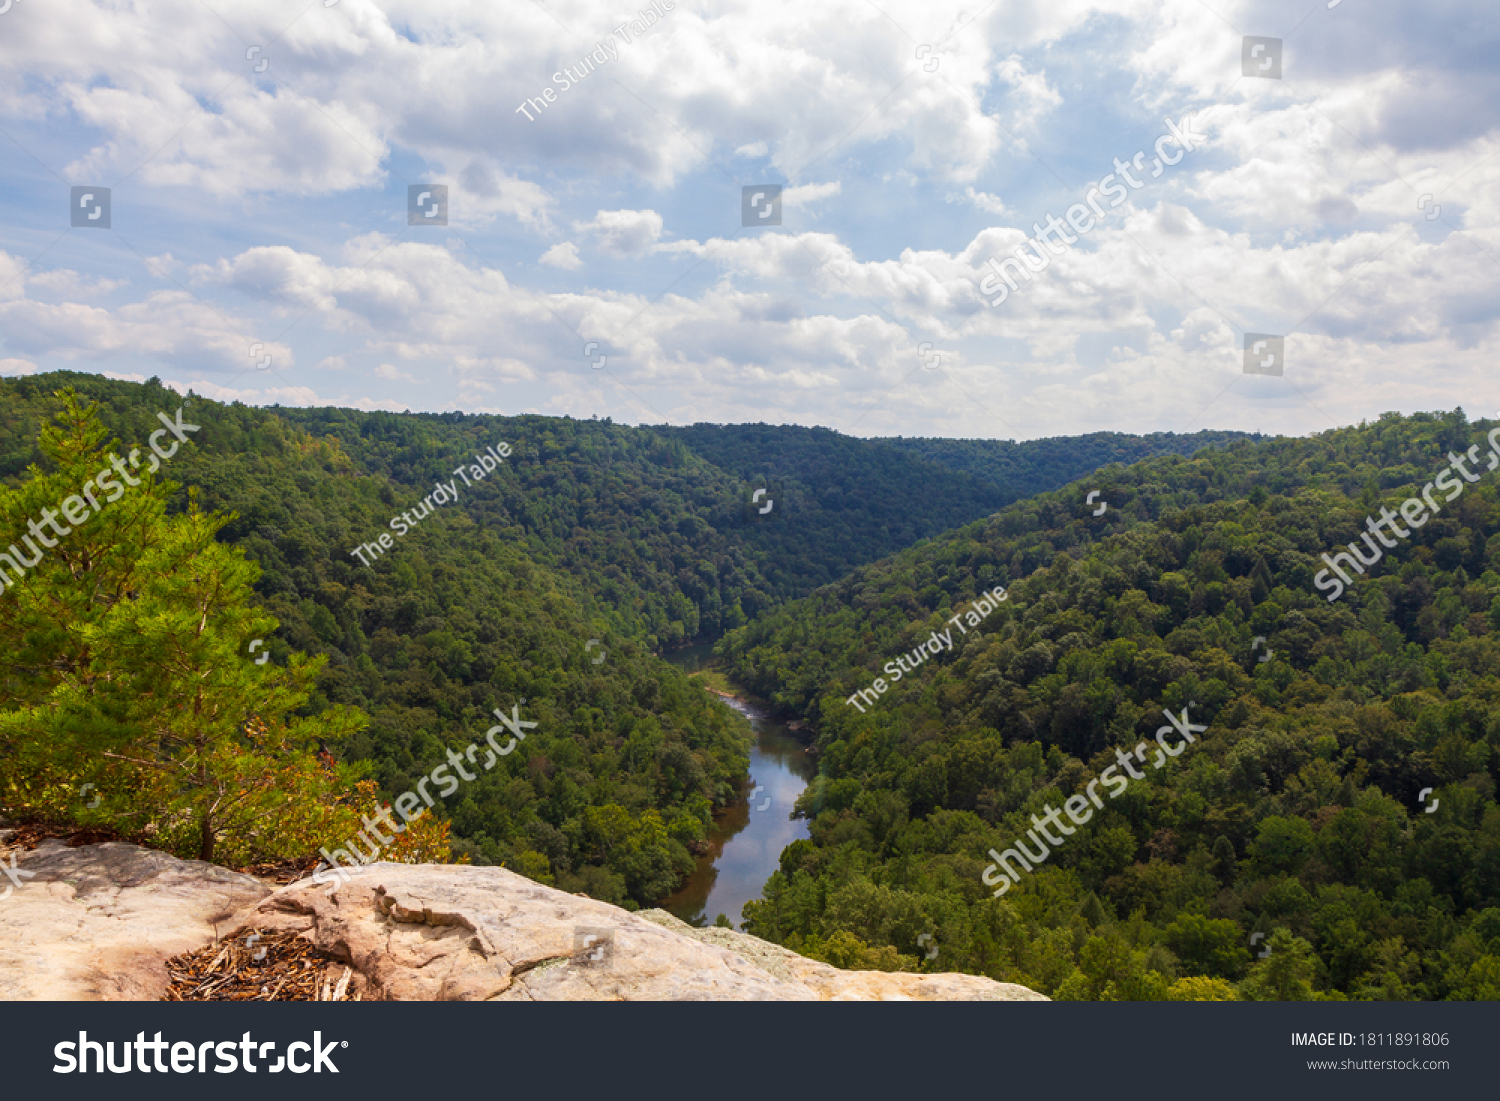 View of valley with green forest and blue river in eastern Tennessee #1811891806